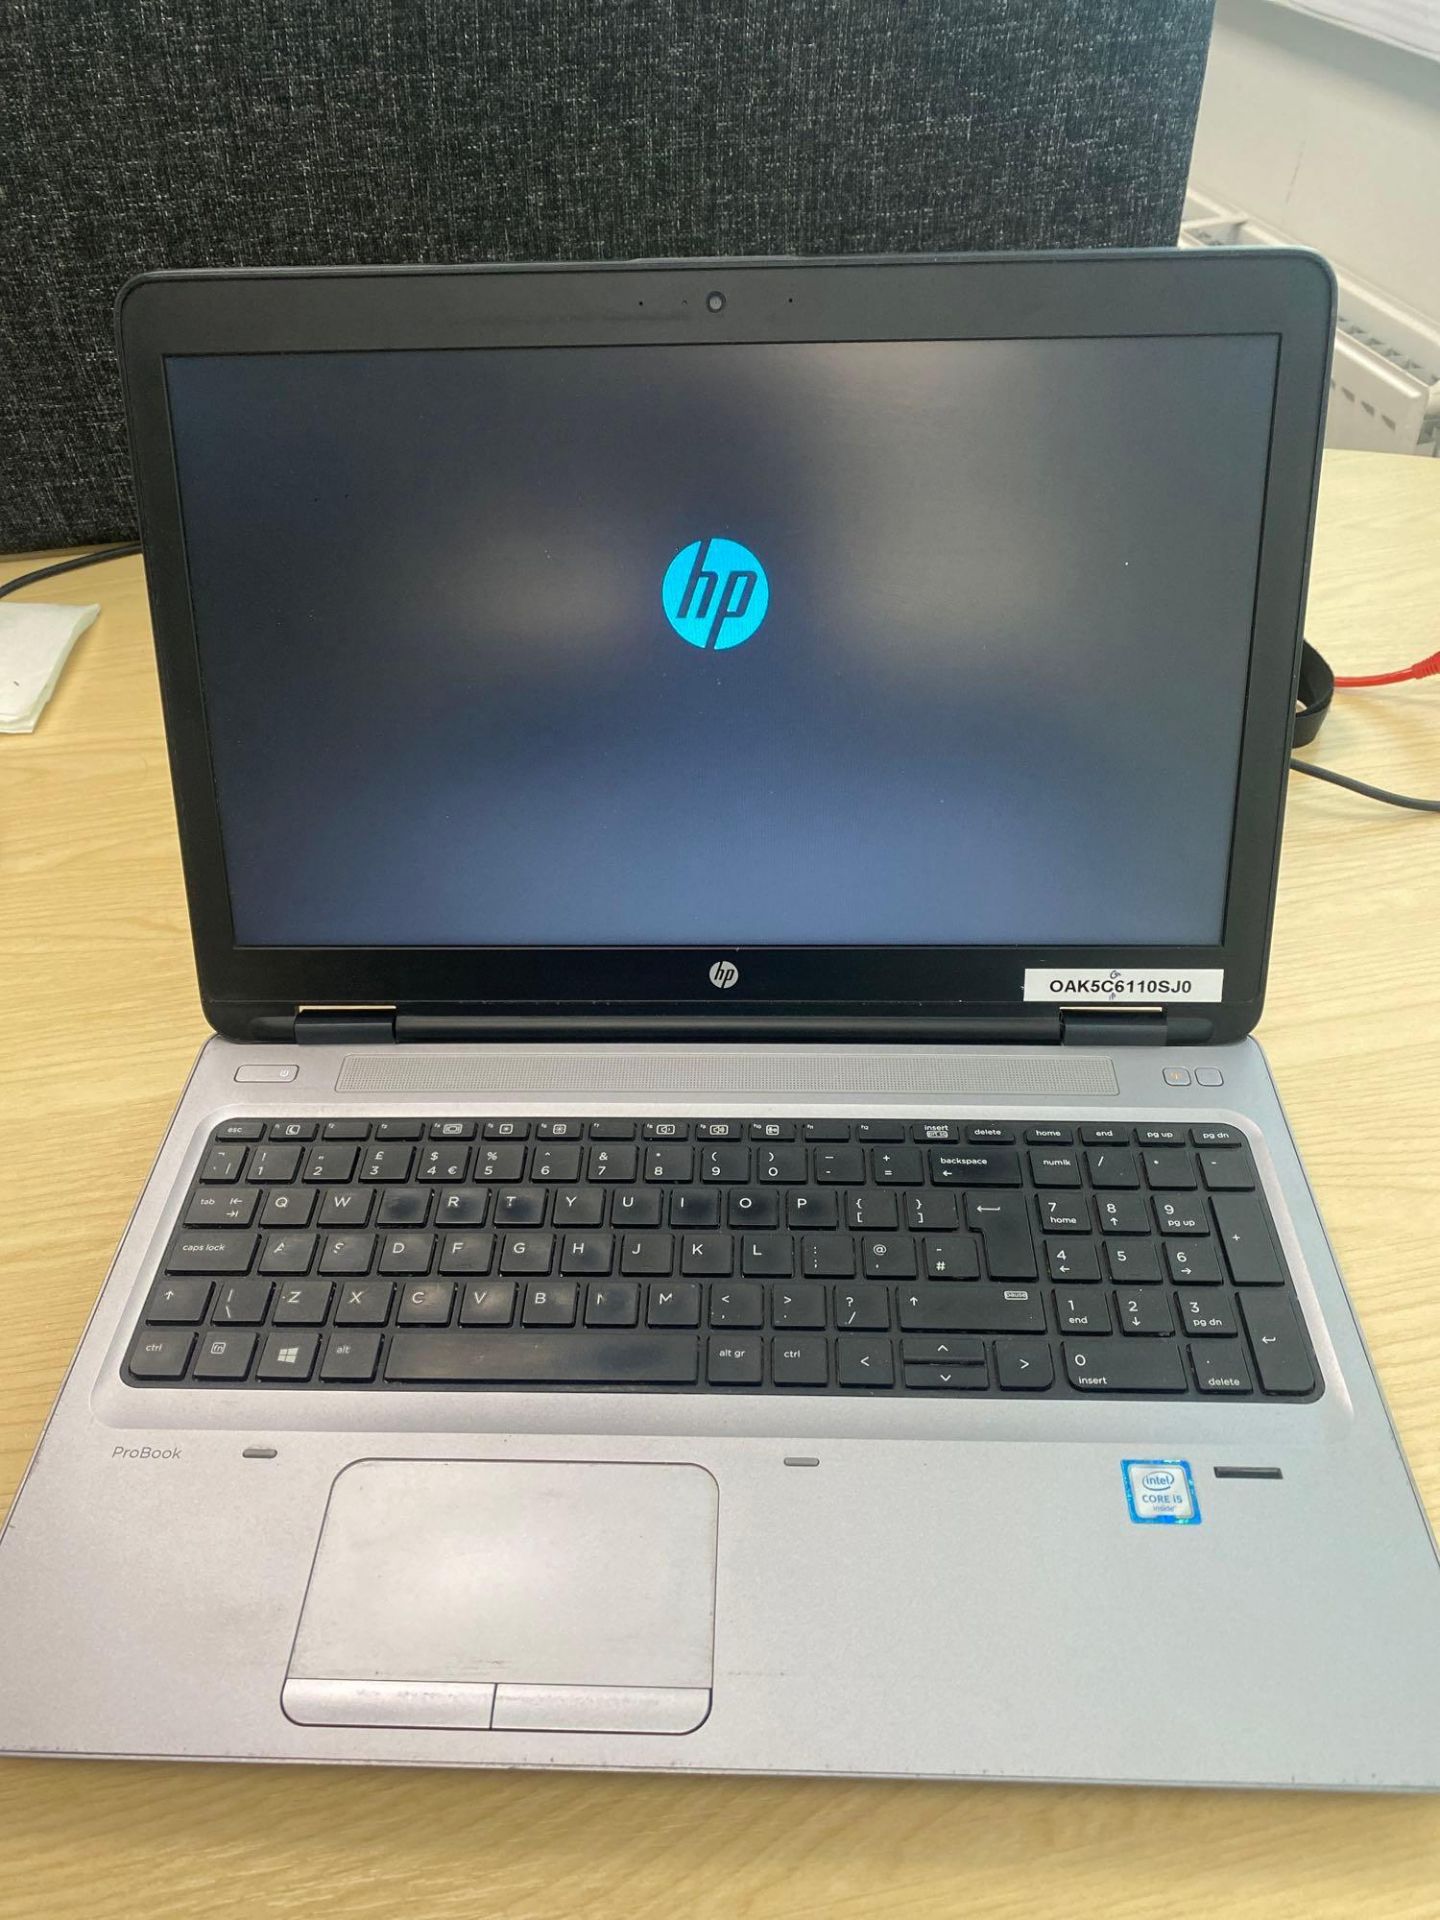 Hewlett Packard ProBook 650 G2, 15” laptop with i5 processor complete with charger - Image 2 of 6